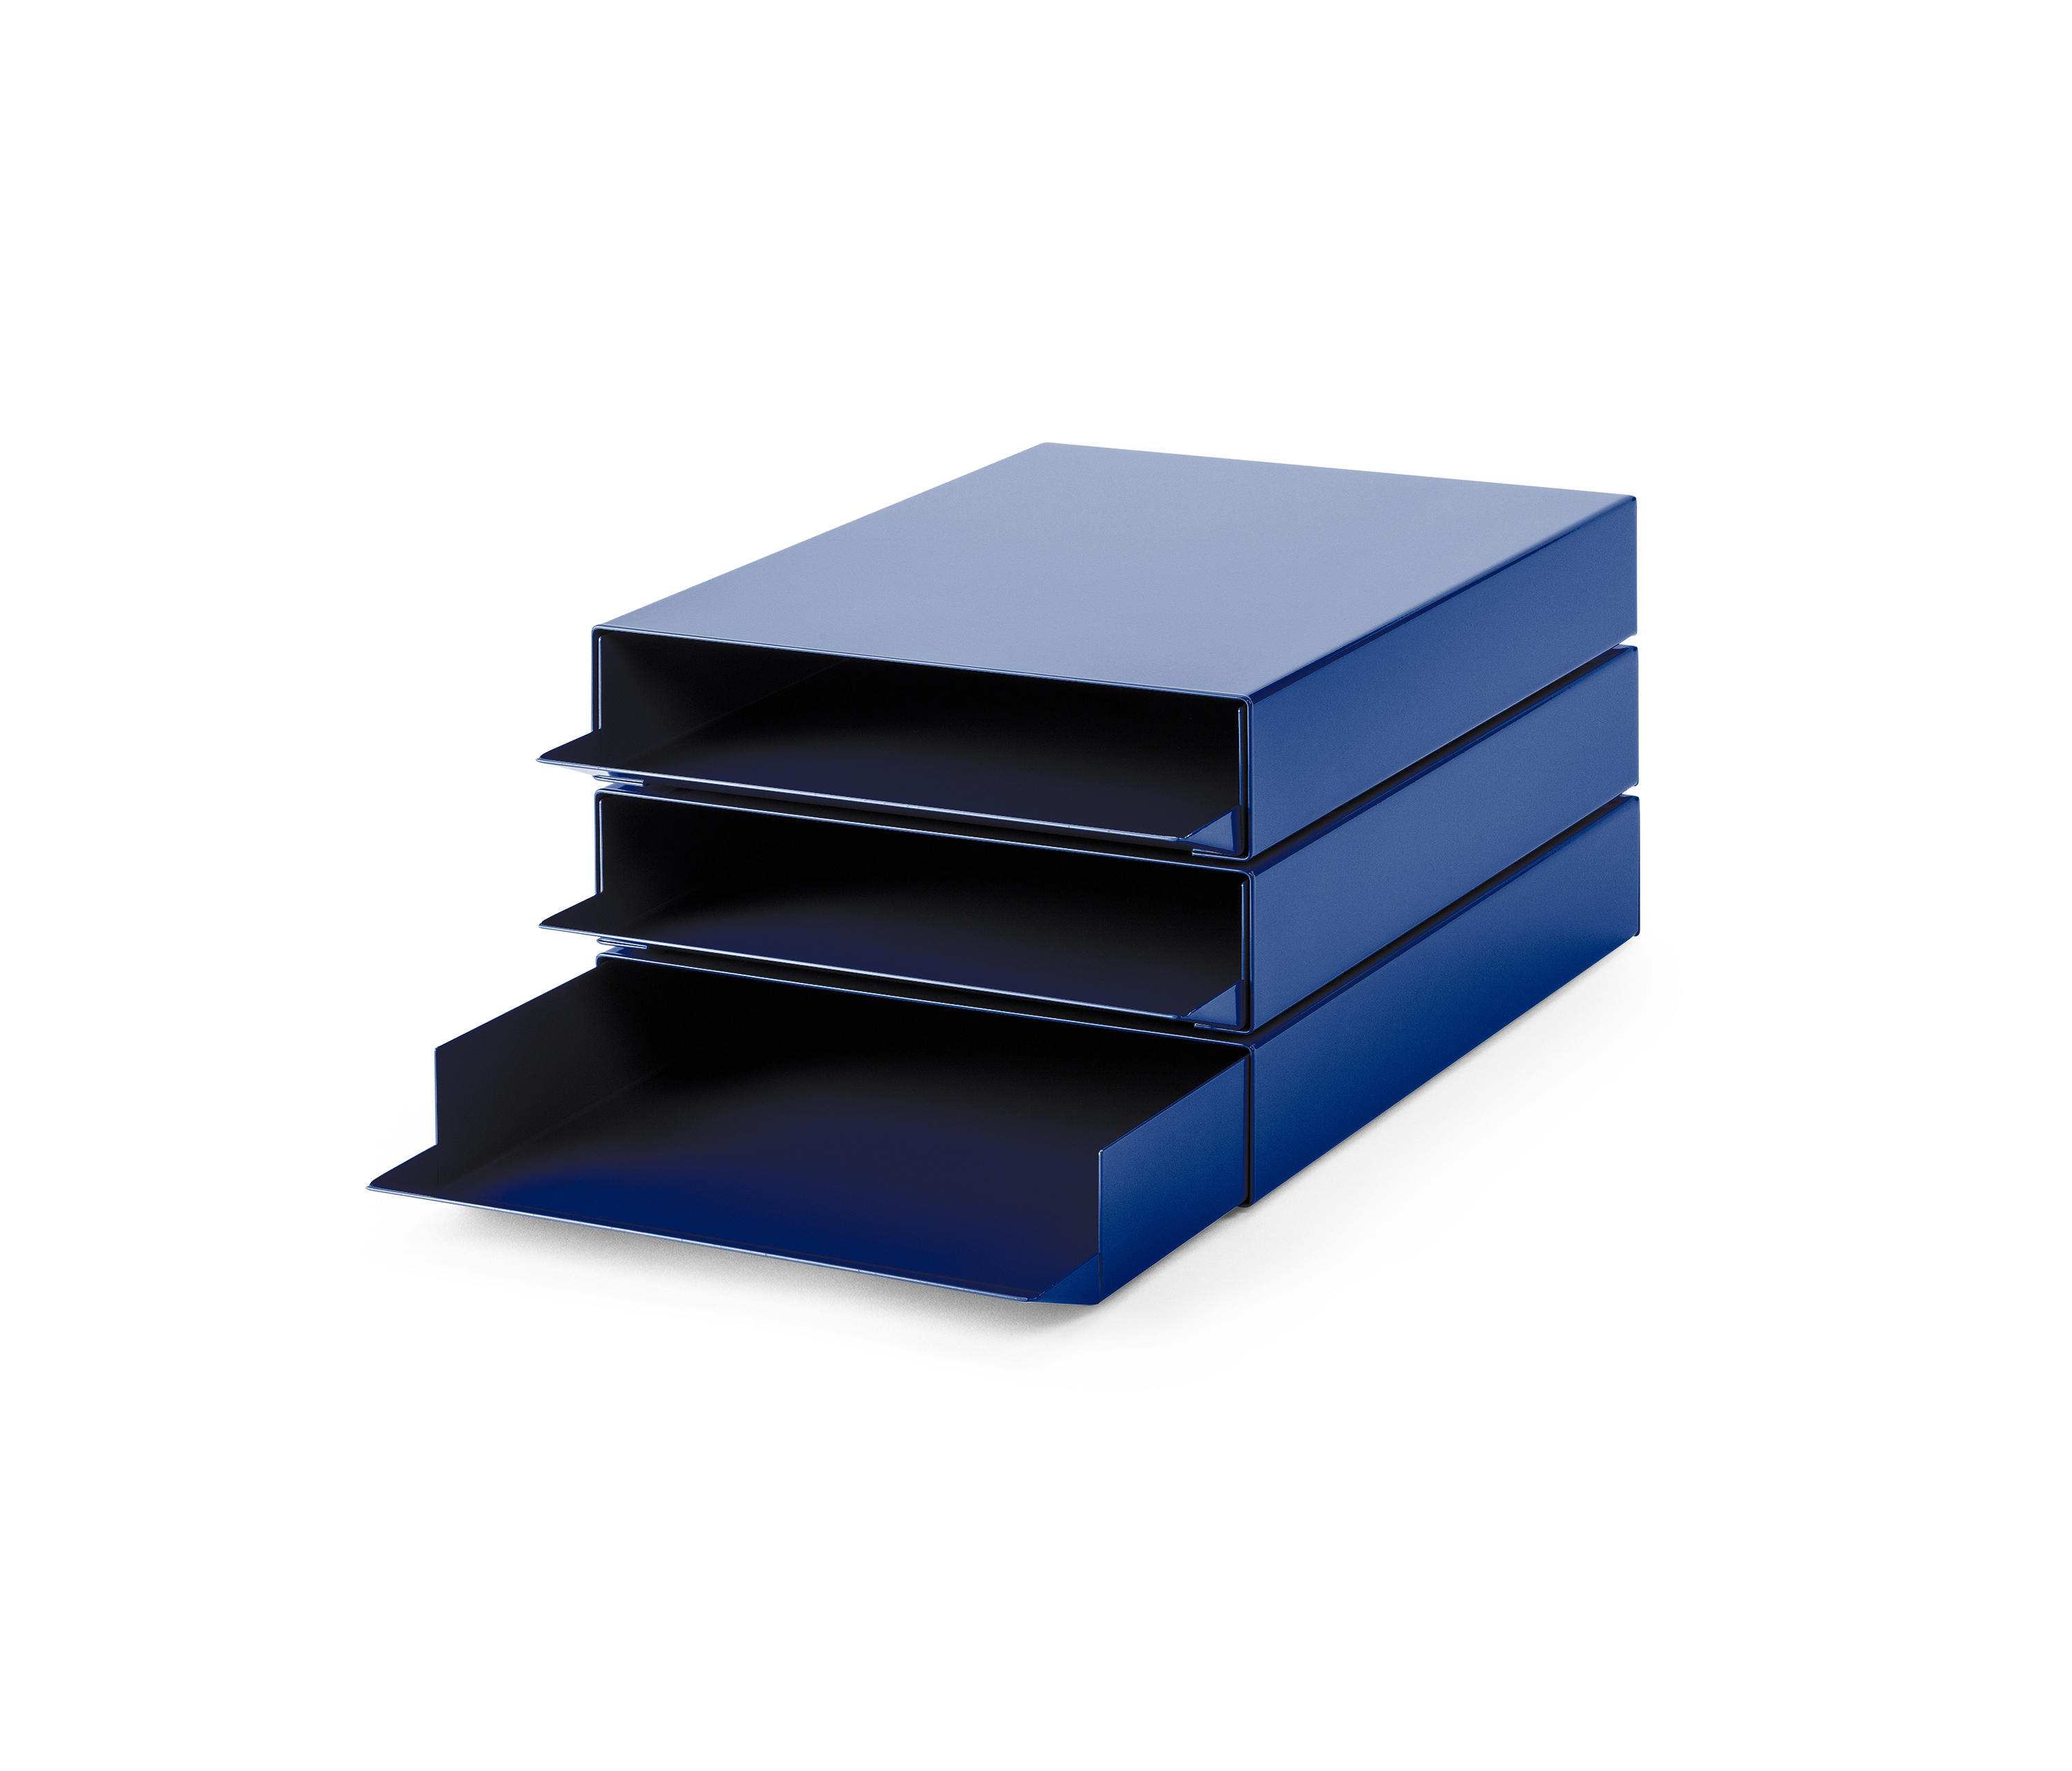 Stapler File Tray Stack Saphire Blue Ral 5003 Architonic